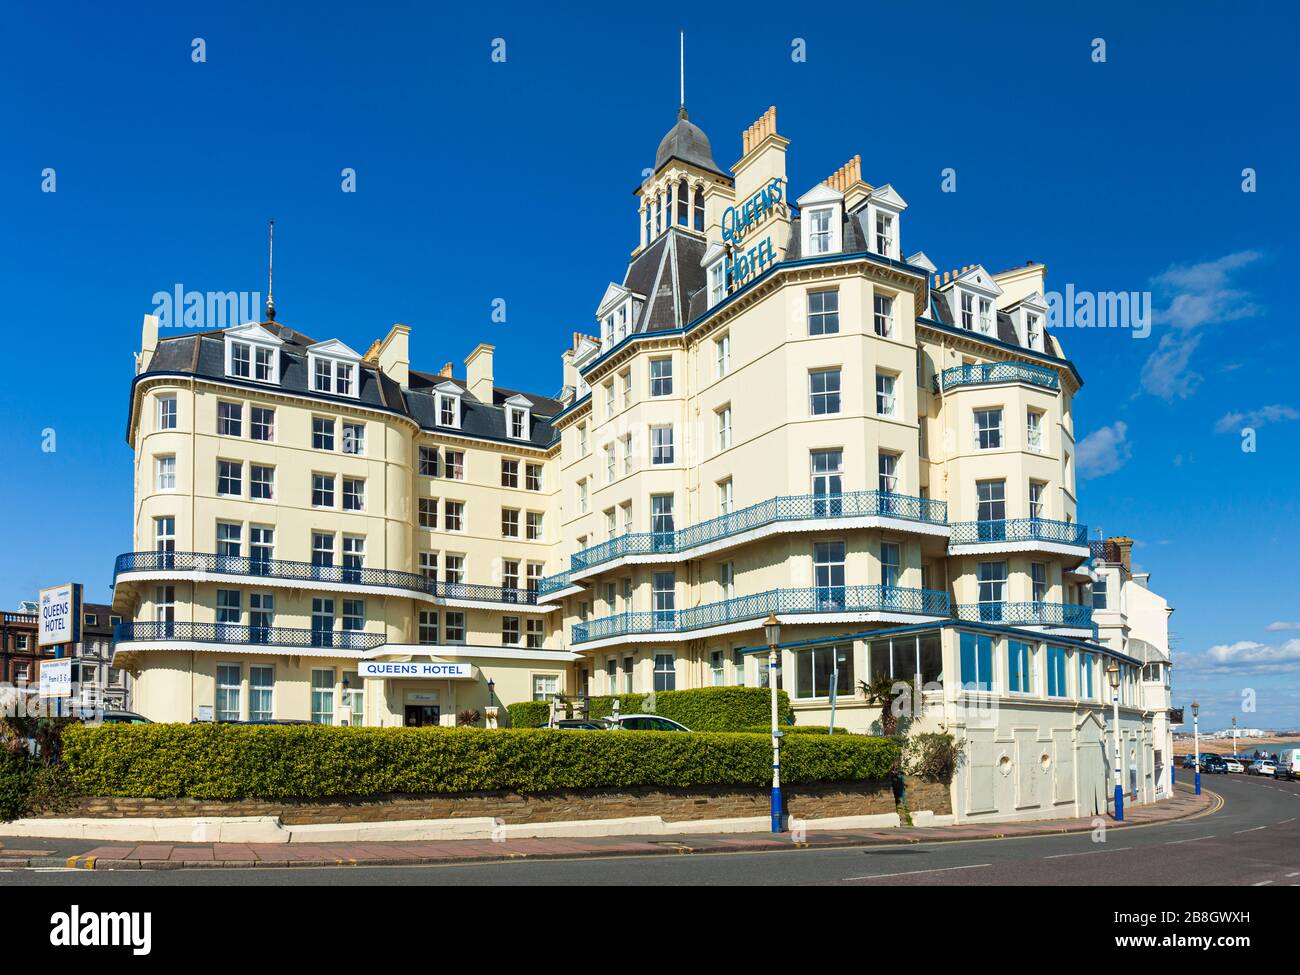 The Queens Hotel, Marine Parade, Eastbourne. Stock Photo